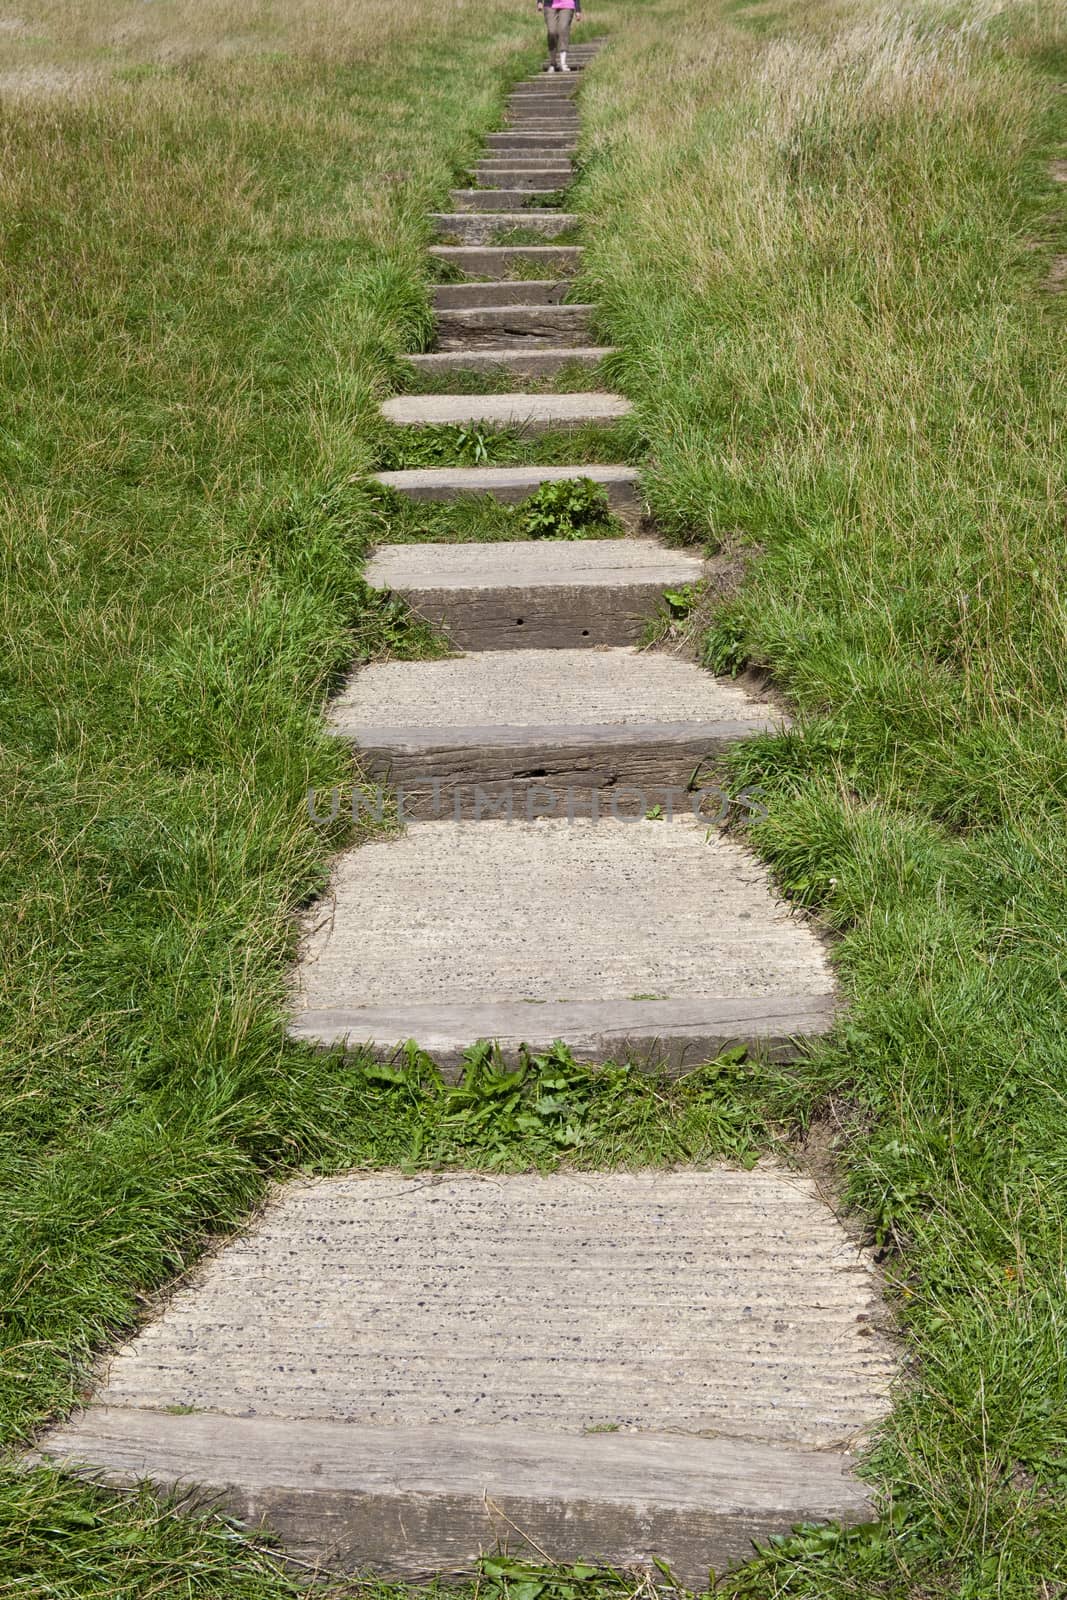 The steps leading up to the Glastonbury Tor in Somerset, England.